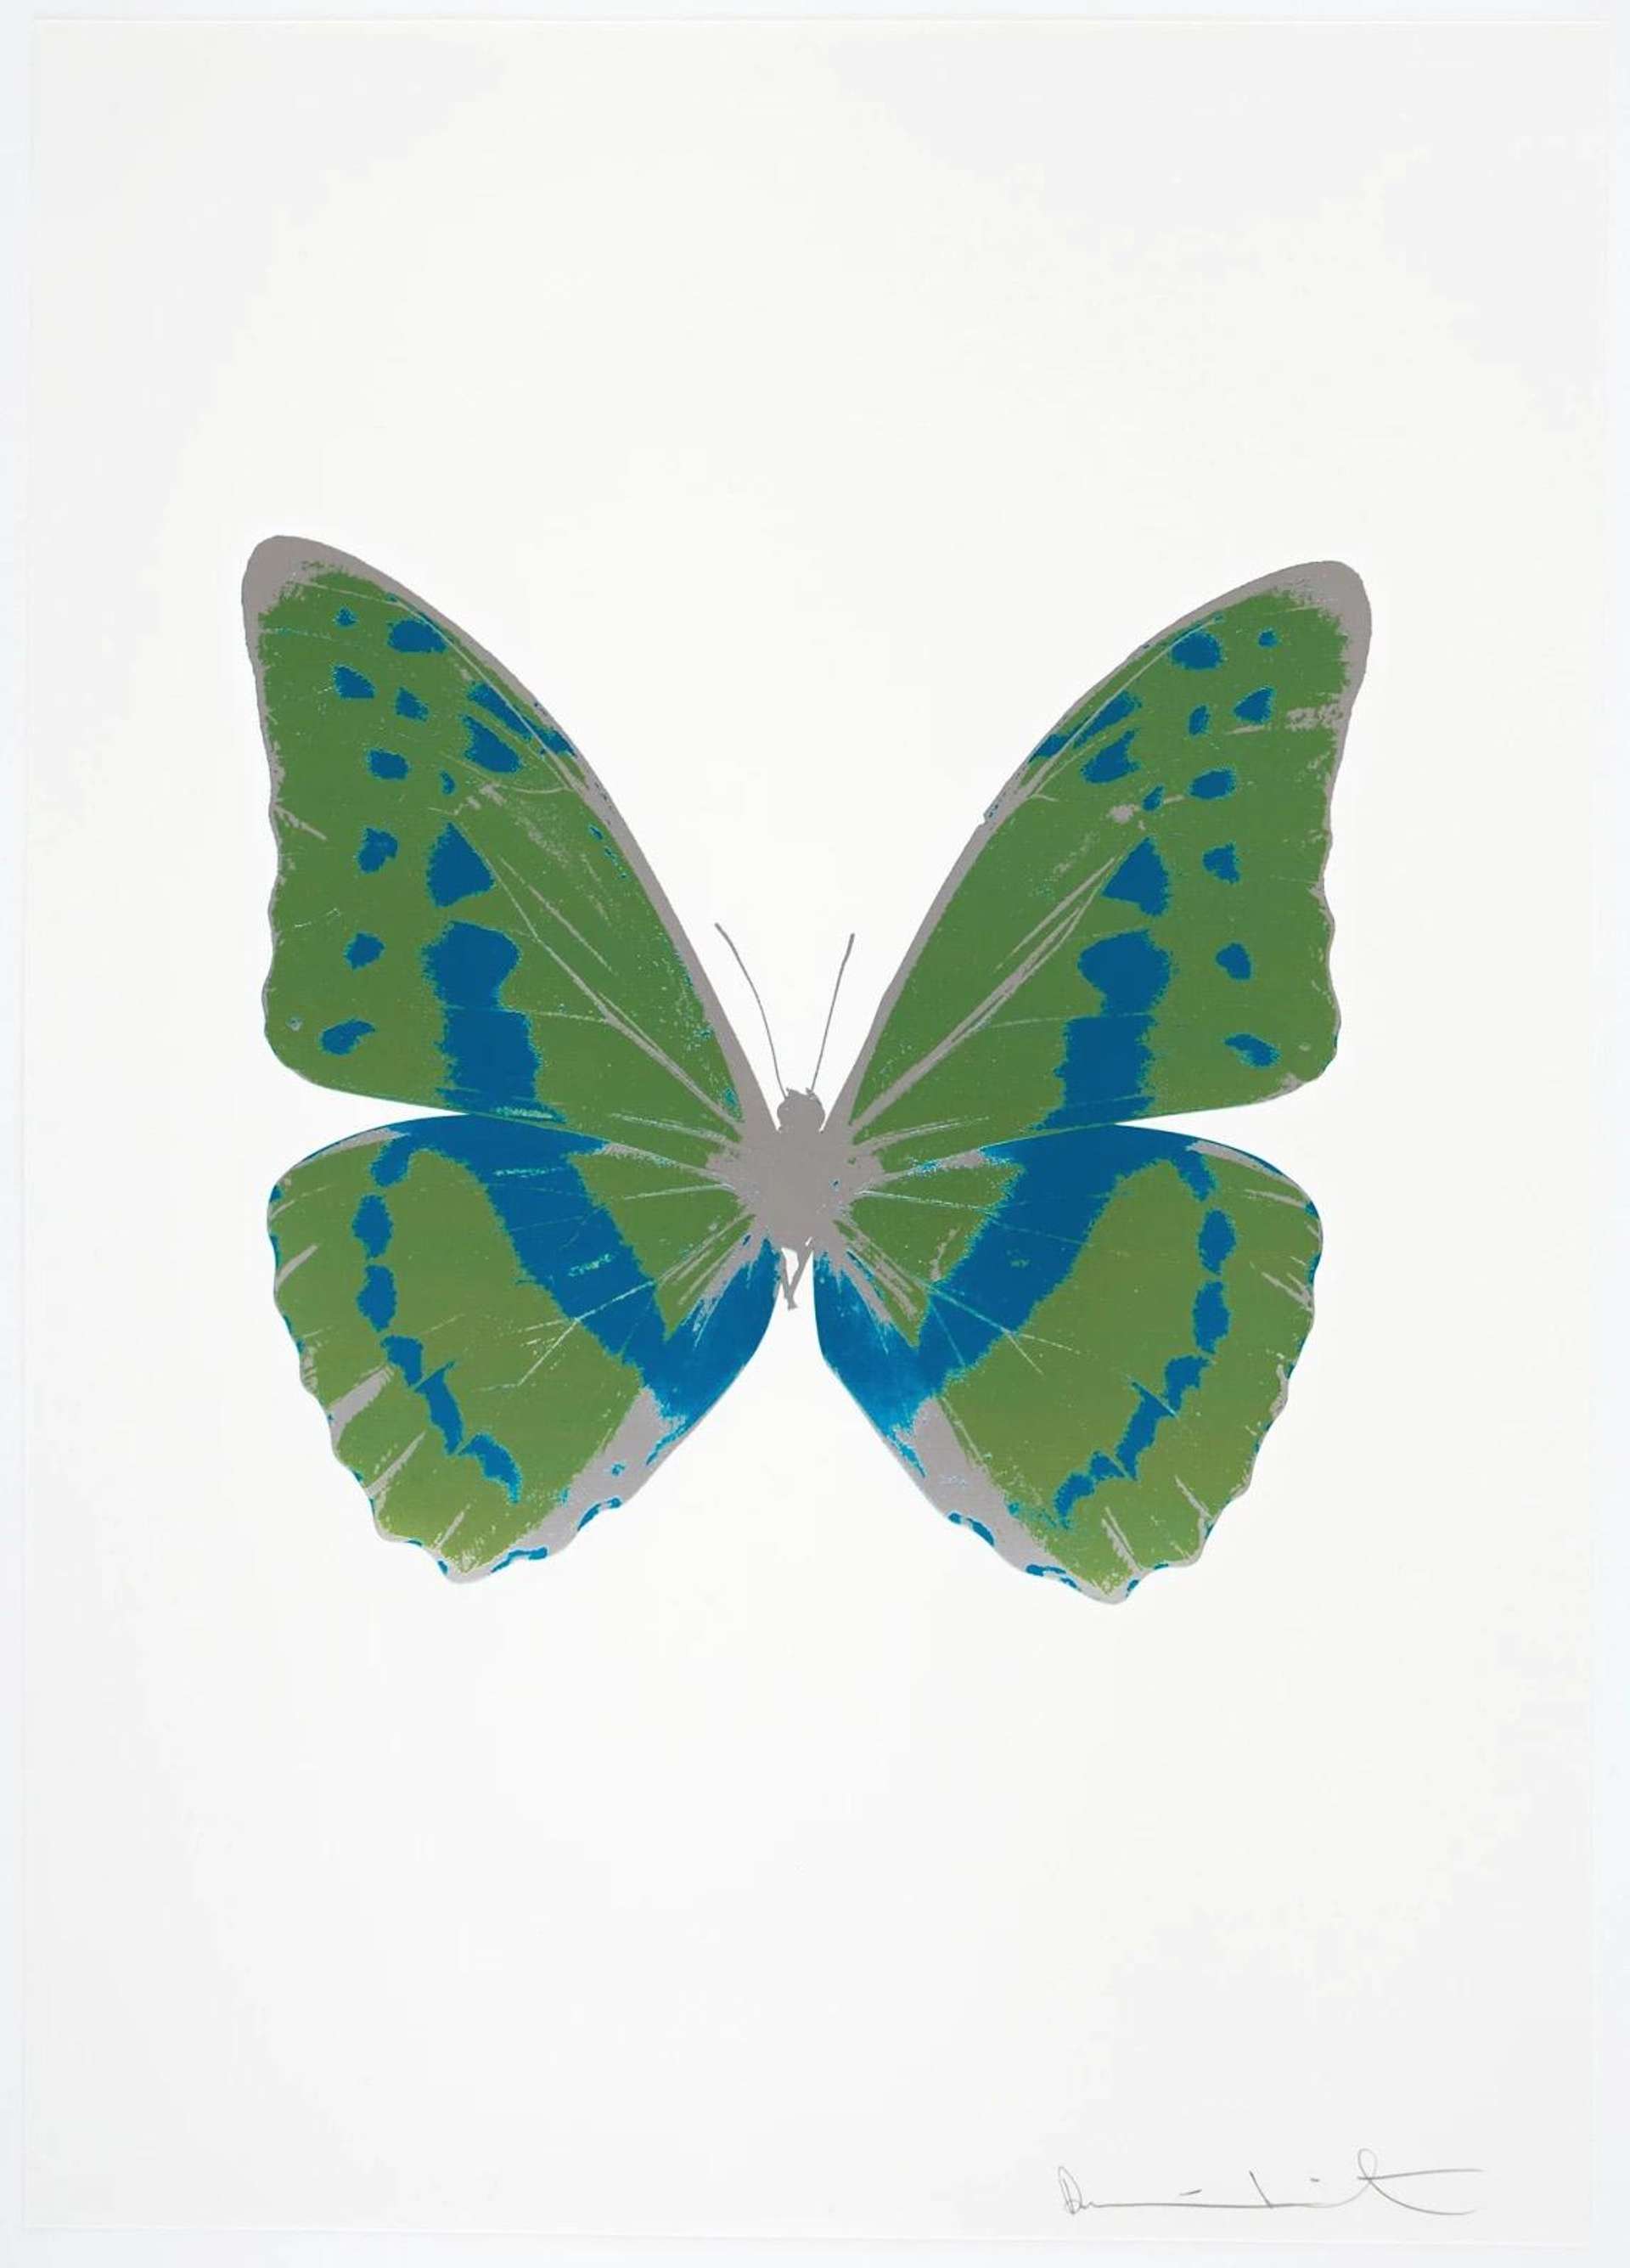 The Souls III (leaf green, turquoise, silver gloss) by Damien Hirst